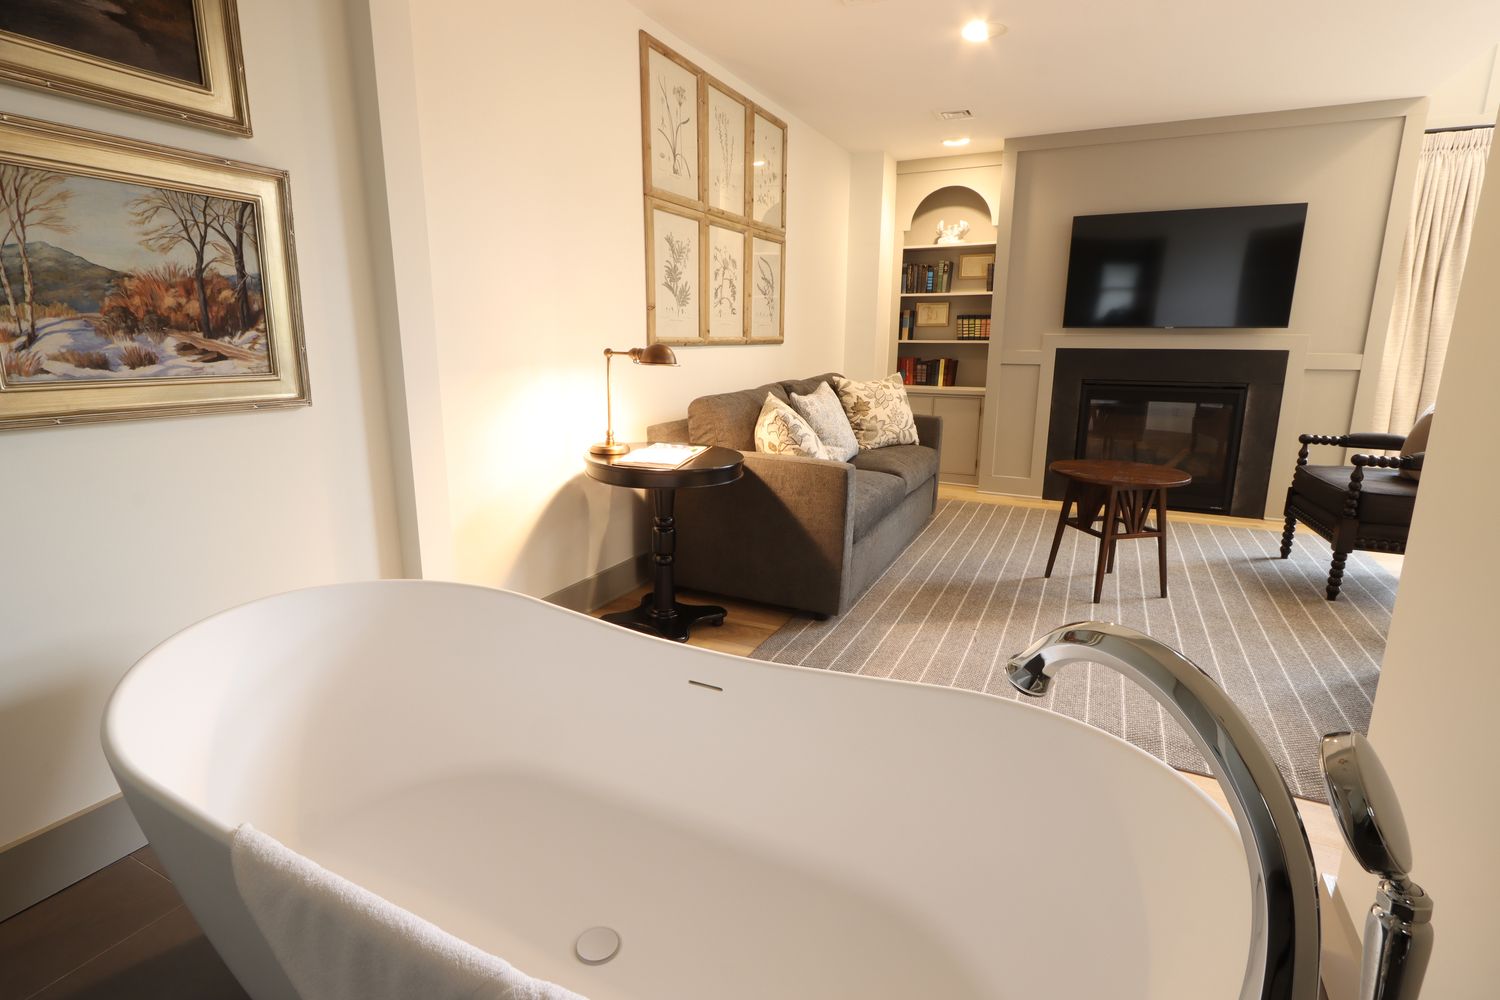 A large soaking tub with a view of the living area in Room 110 at The Golden Plough Inn